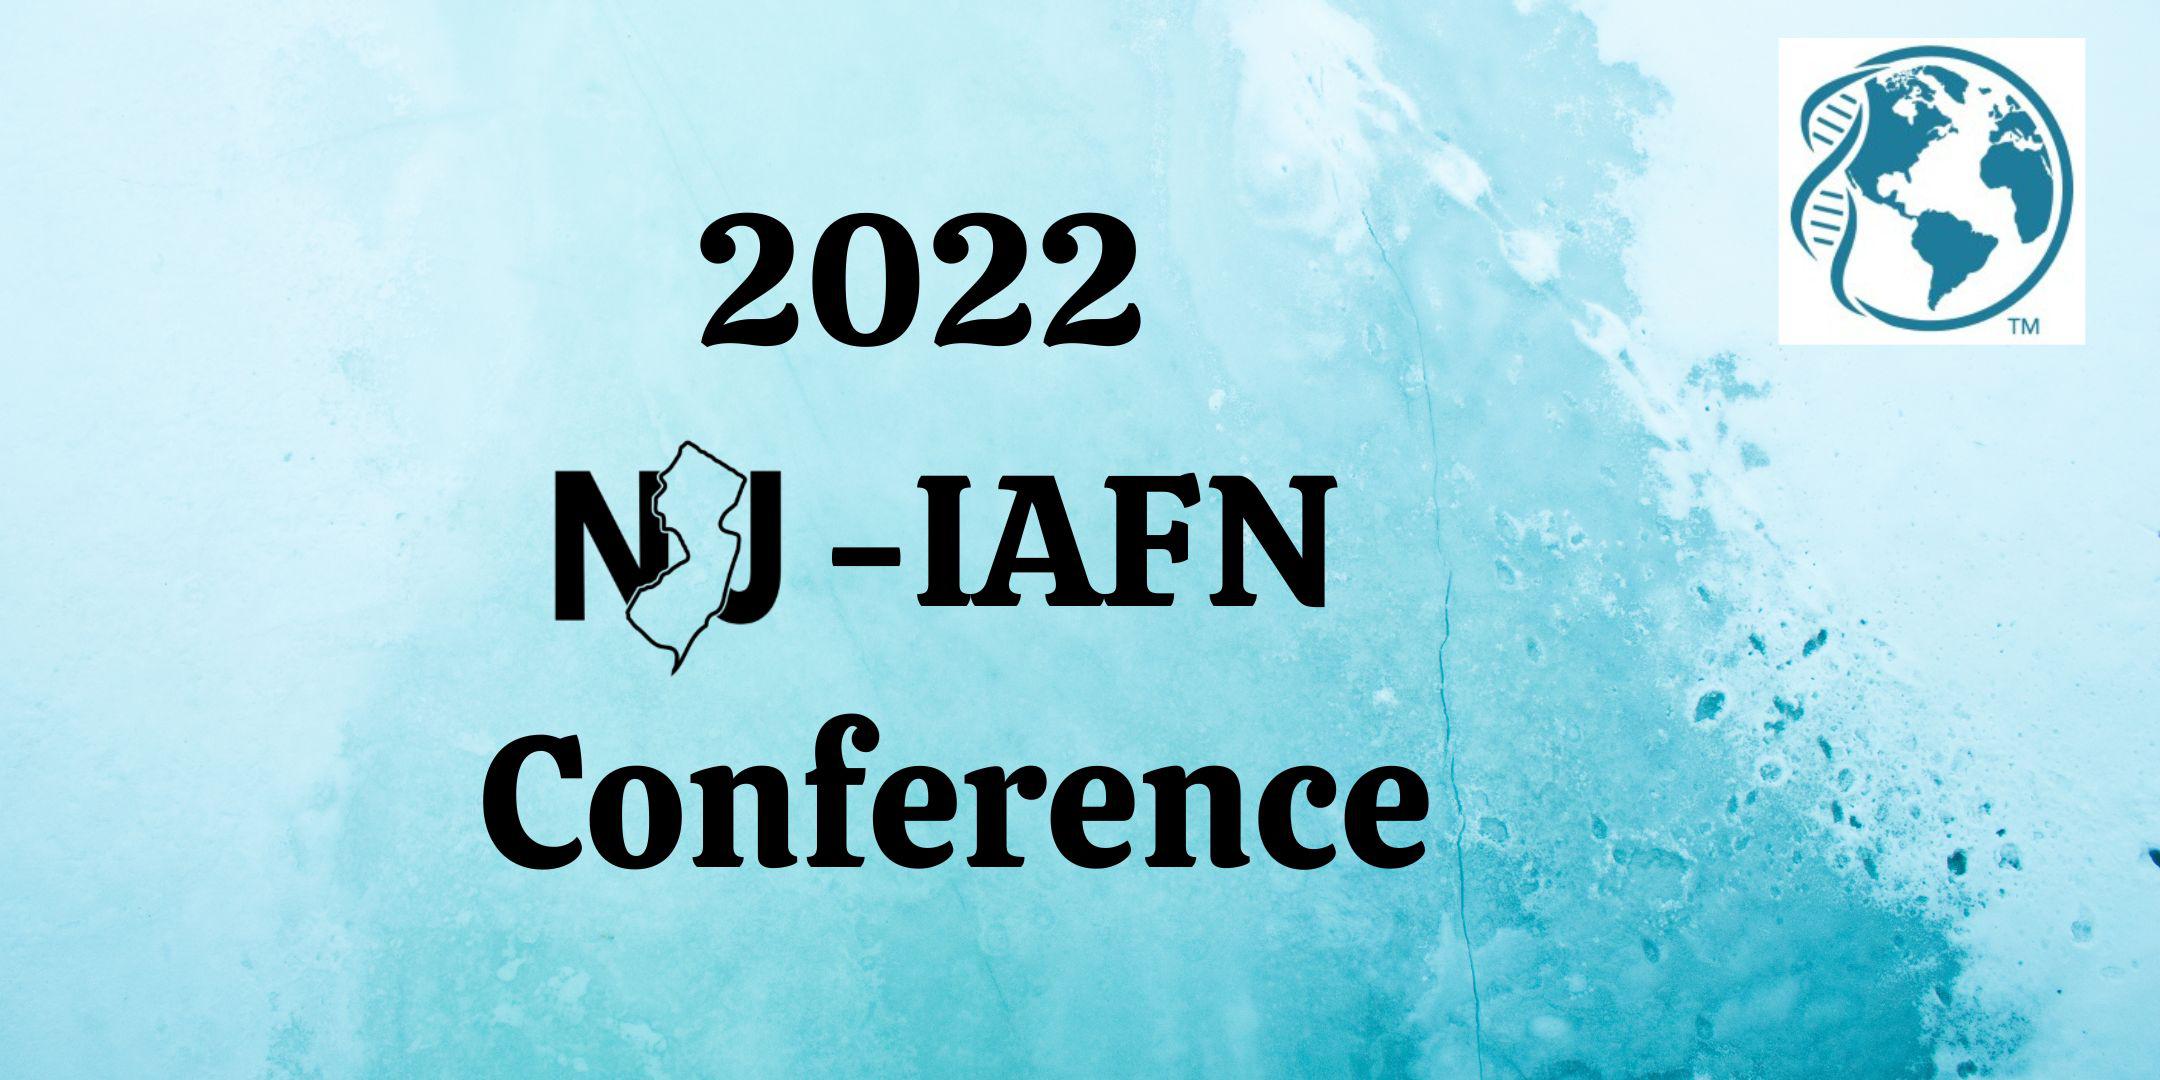 2022 NJIAFN Forensic Nursing Conference Tickets, Tue, Nov 29, 2022 at